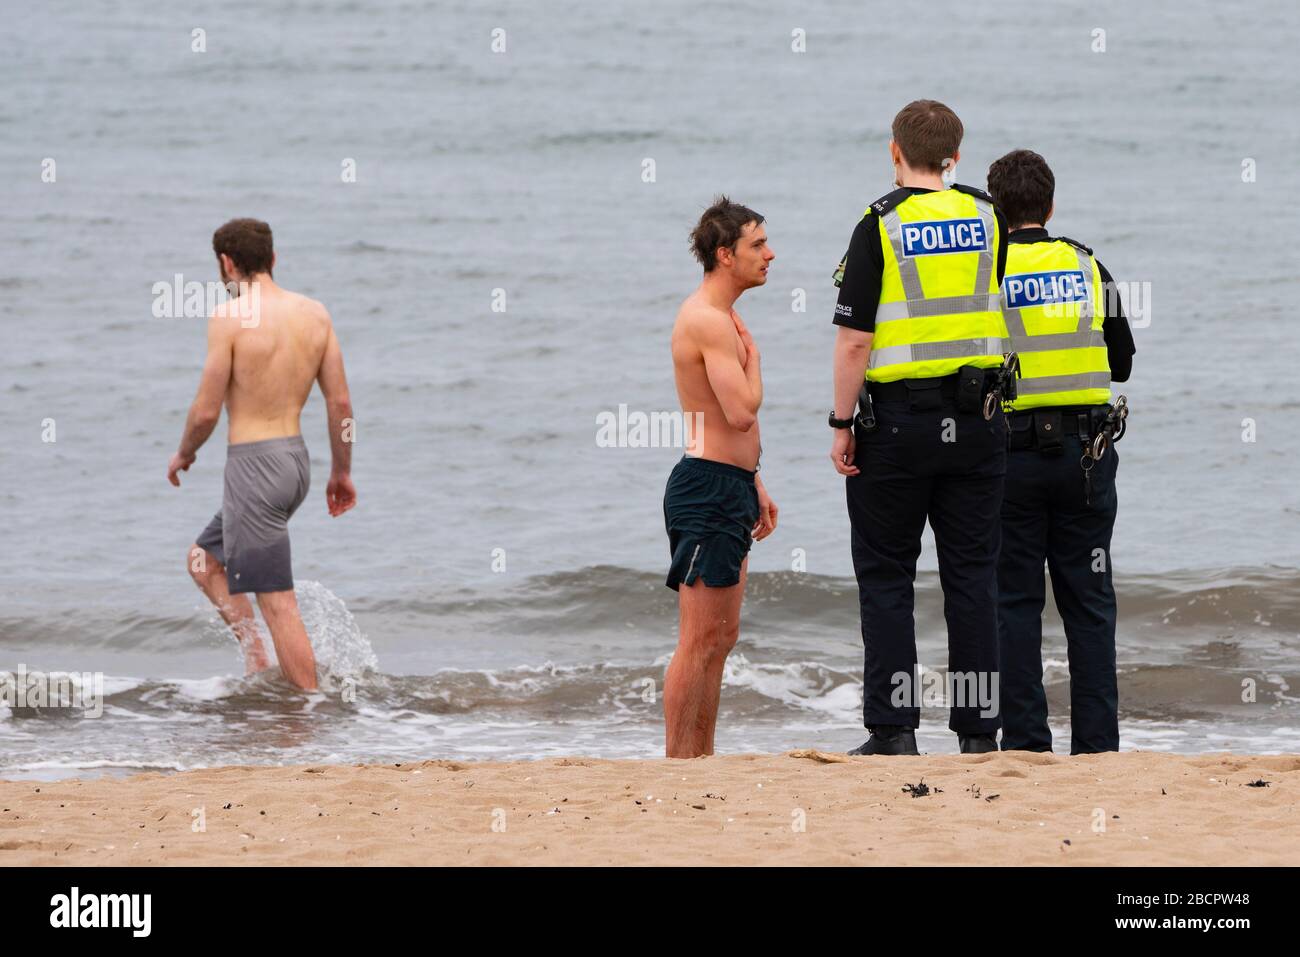 Portobello, Edinburgh, Scotland, UK. 5 April, 2020. On the second Sunday of the coronavirus lockdown in the UK the public are outside taking their daily exercise. Pictured. Police talk to men in swimming trunks on beach at Portobello. After discussion the men were allowed to continue with their swim. Iain Masterton/Alamy Live News Stock Photo